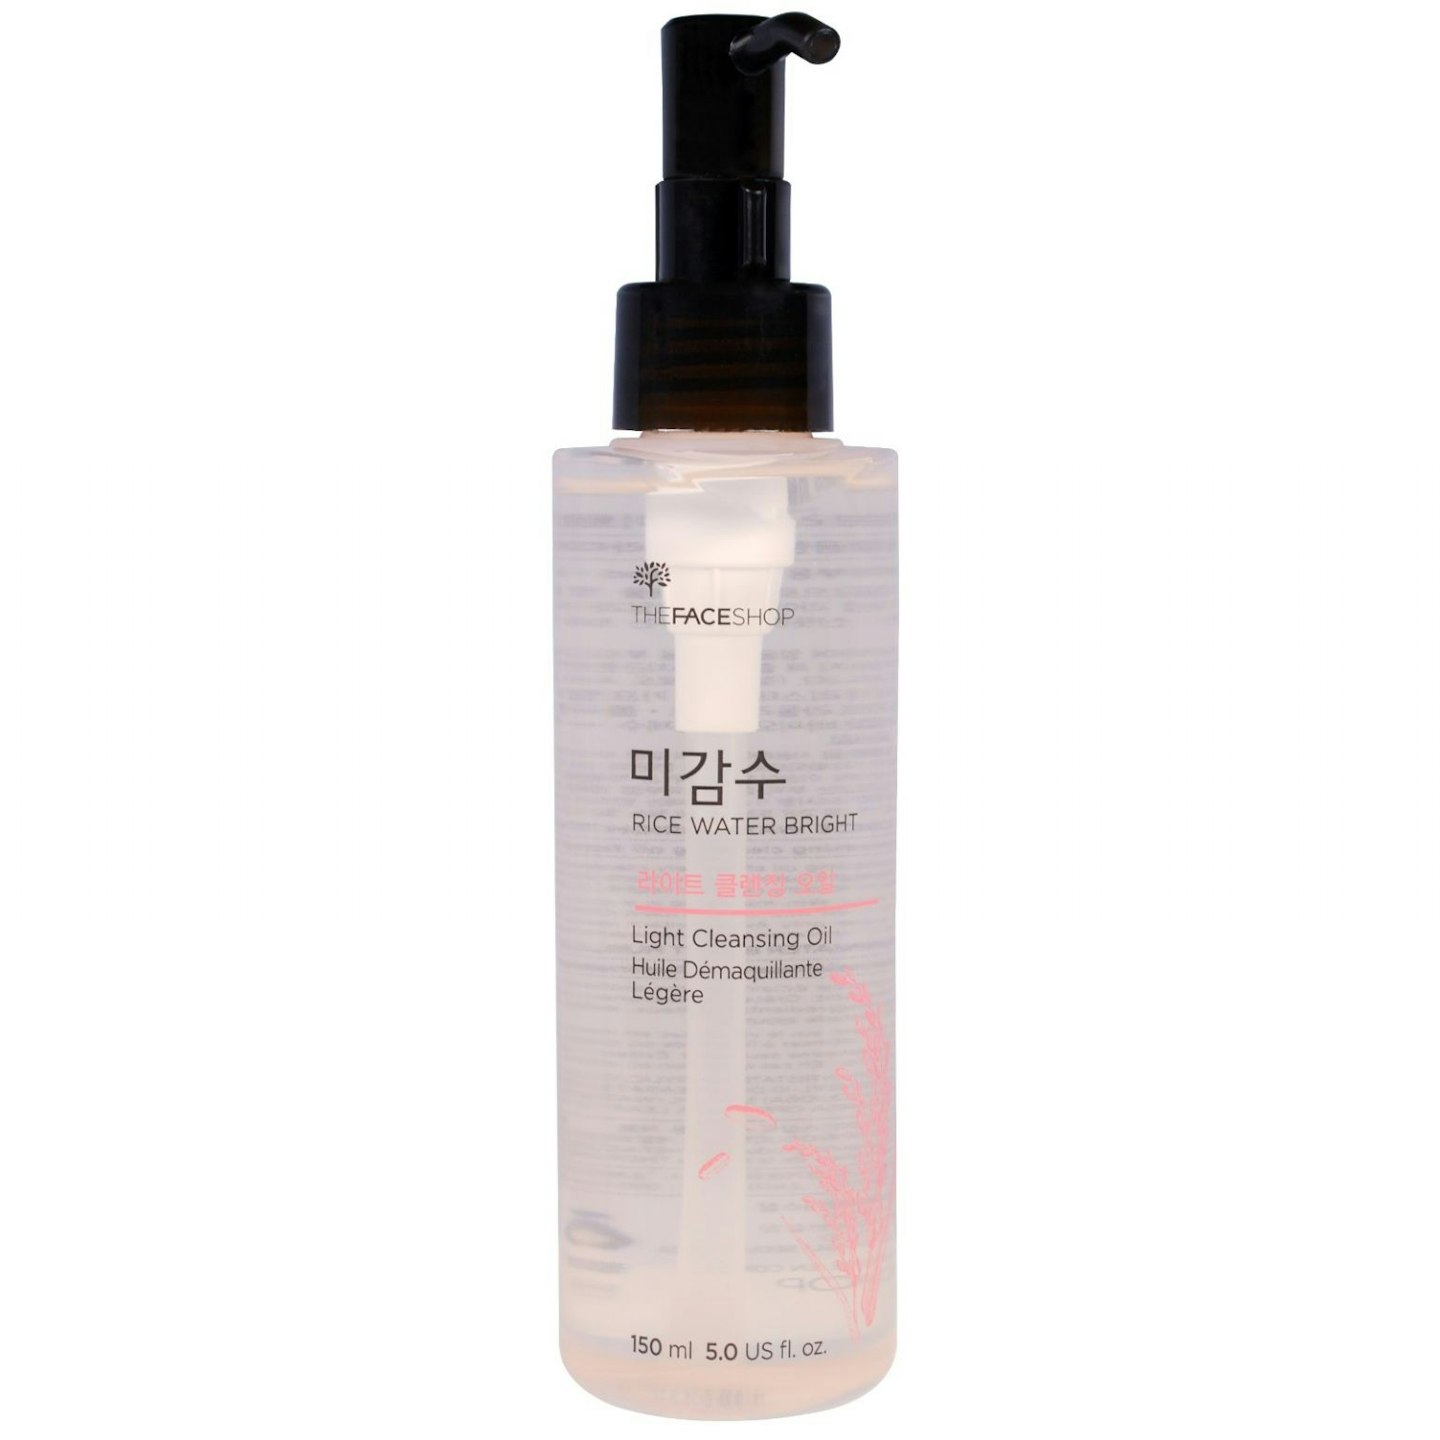 The Face Shop Rice Water Bright Cleansing Light Oil, £15.50